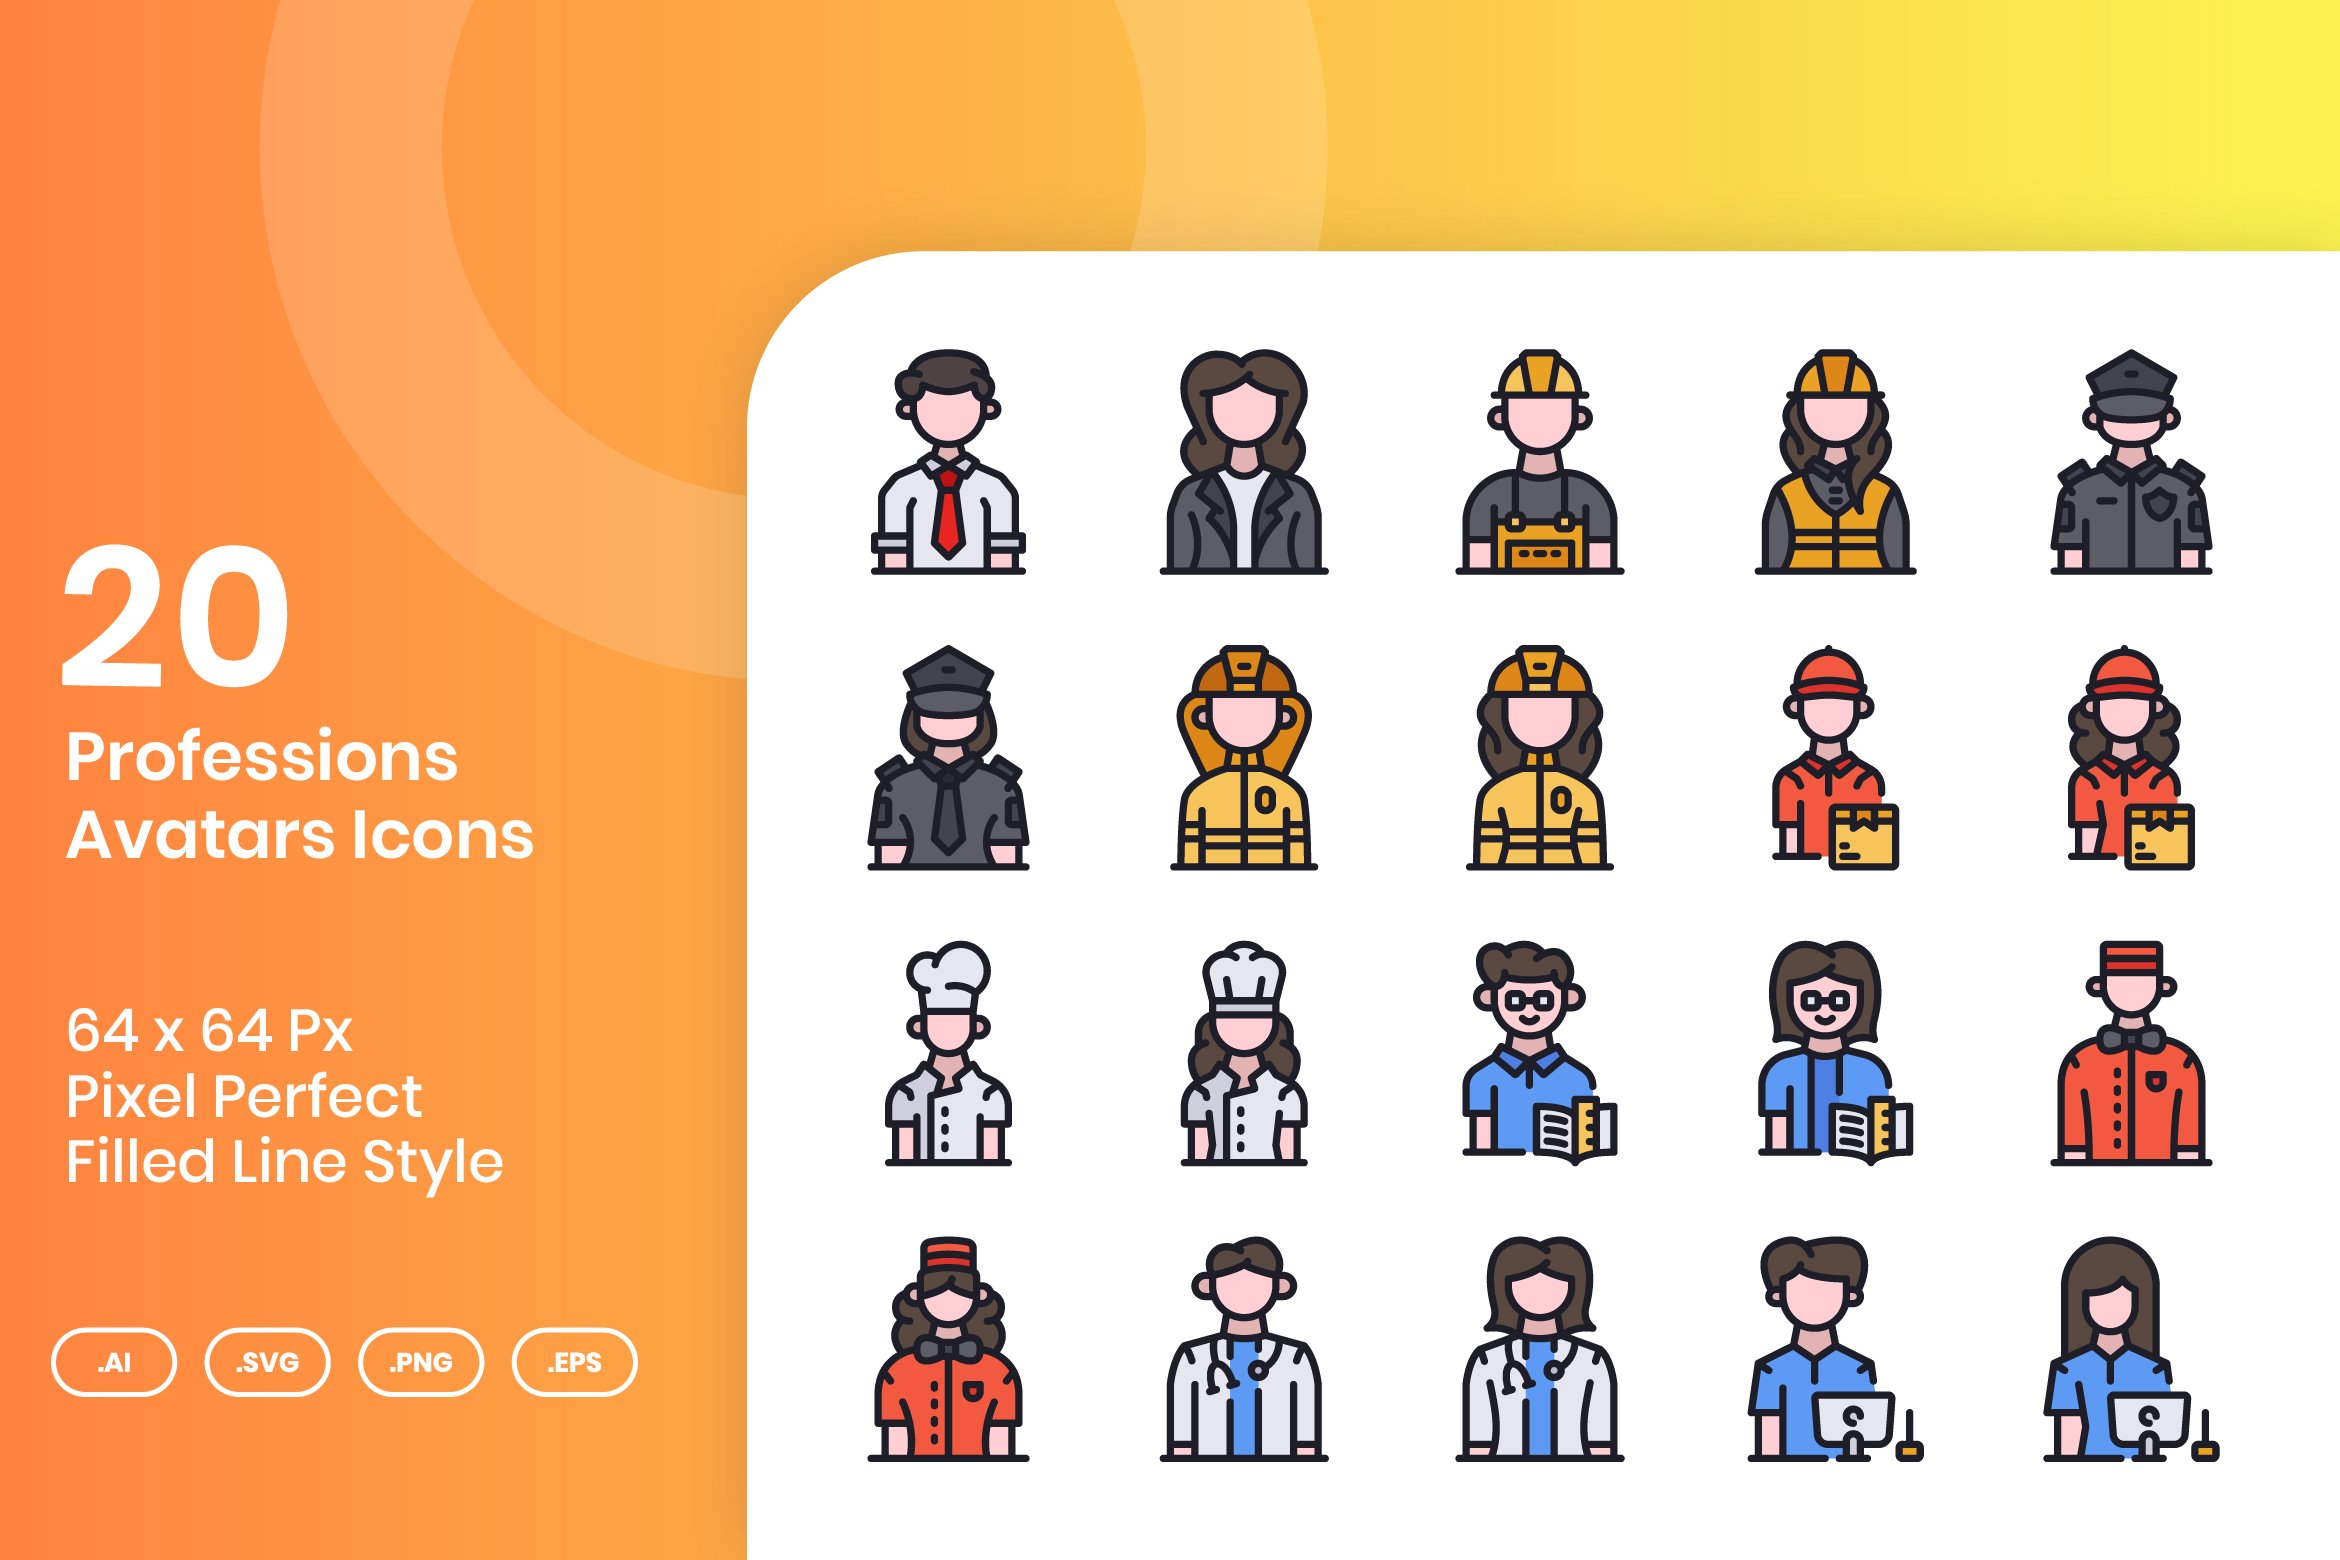 20 Professions Avatars - Filled Line cover image.